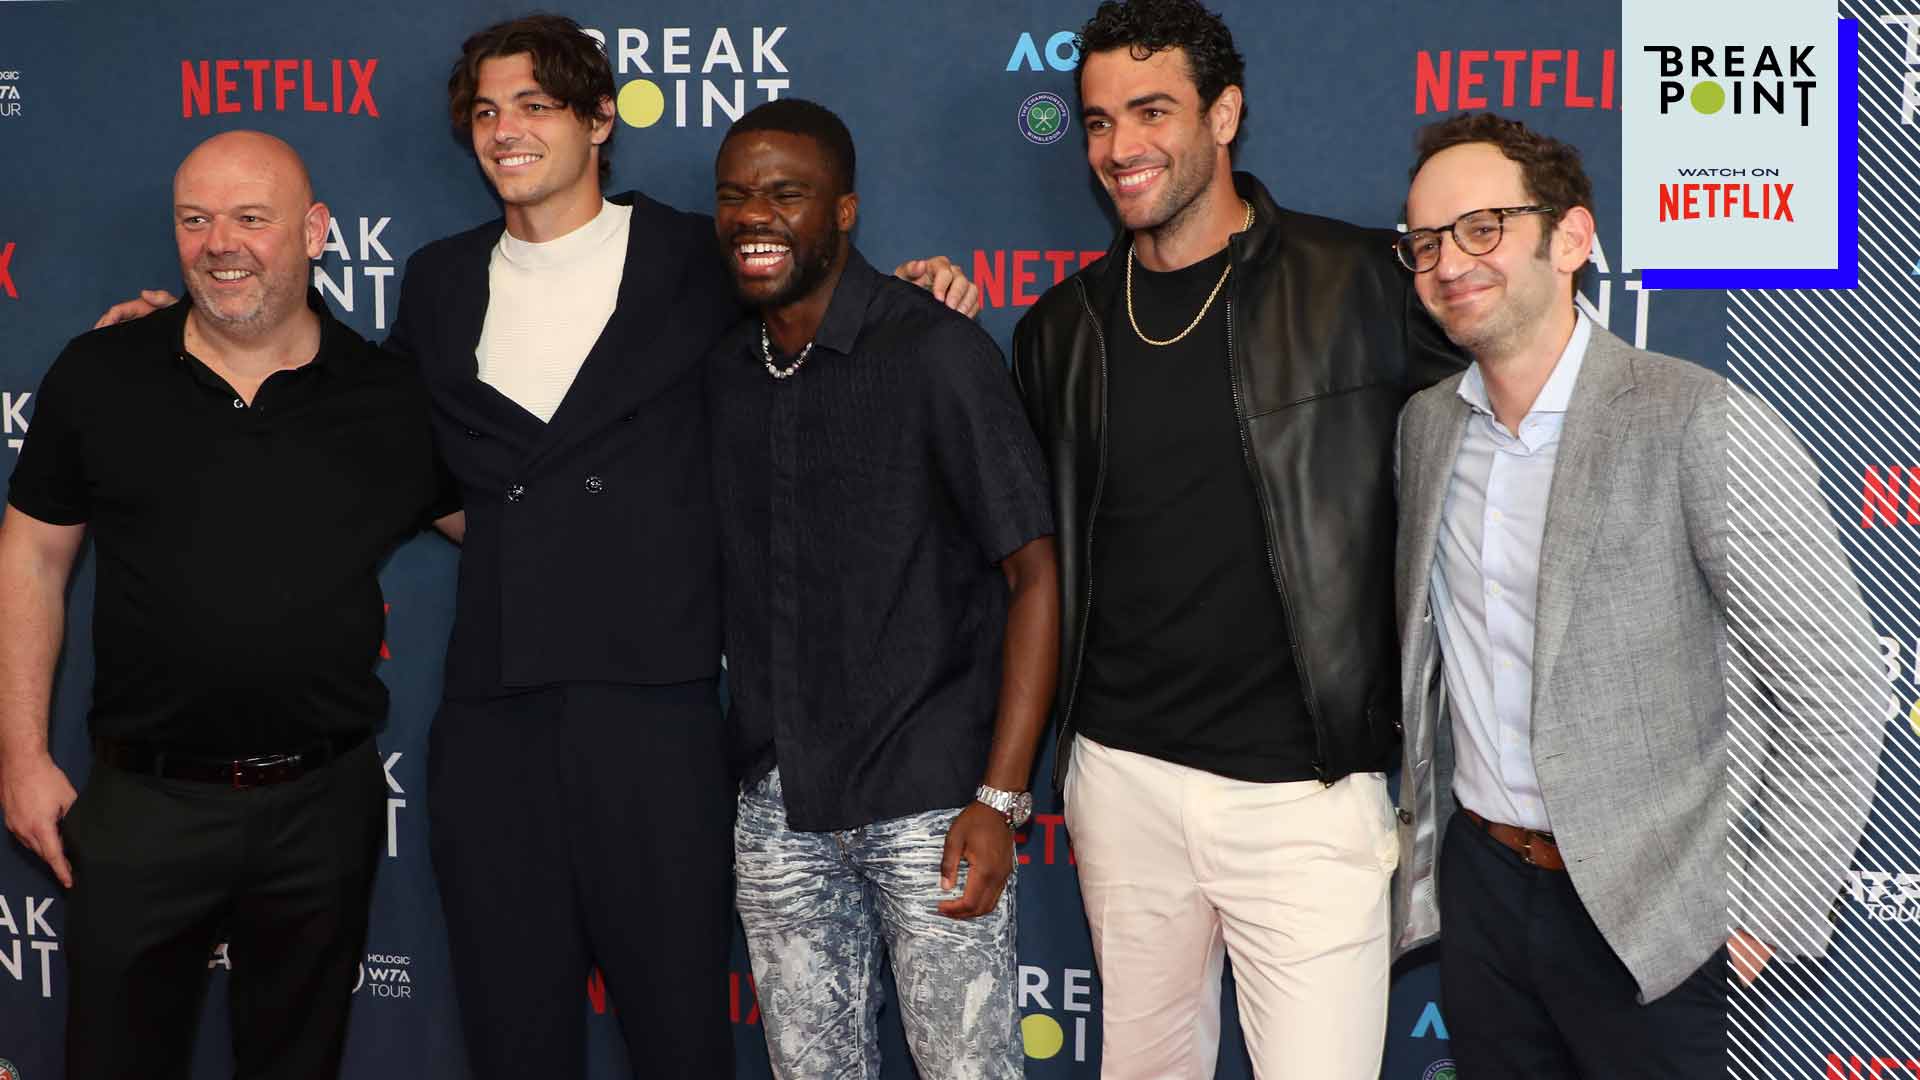 Break Point Executive Producer Paul Martin (far left) and Netflix Director of Documentary Series Gabe Spitzer pose with series stars in January.